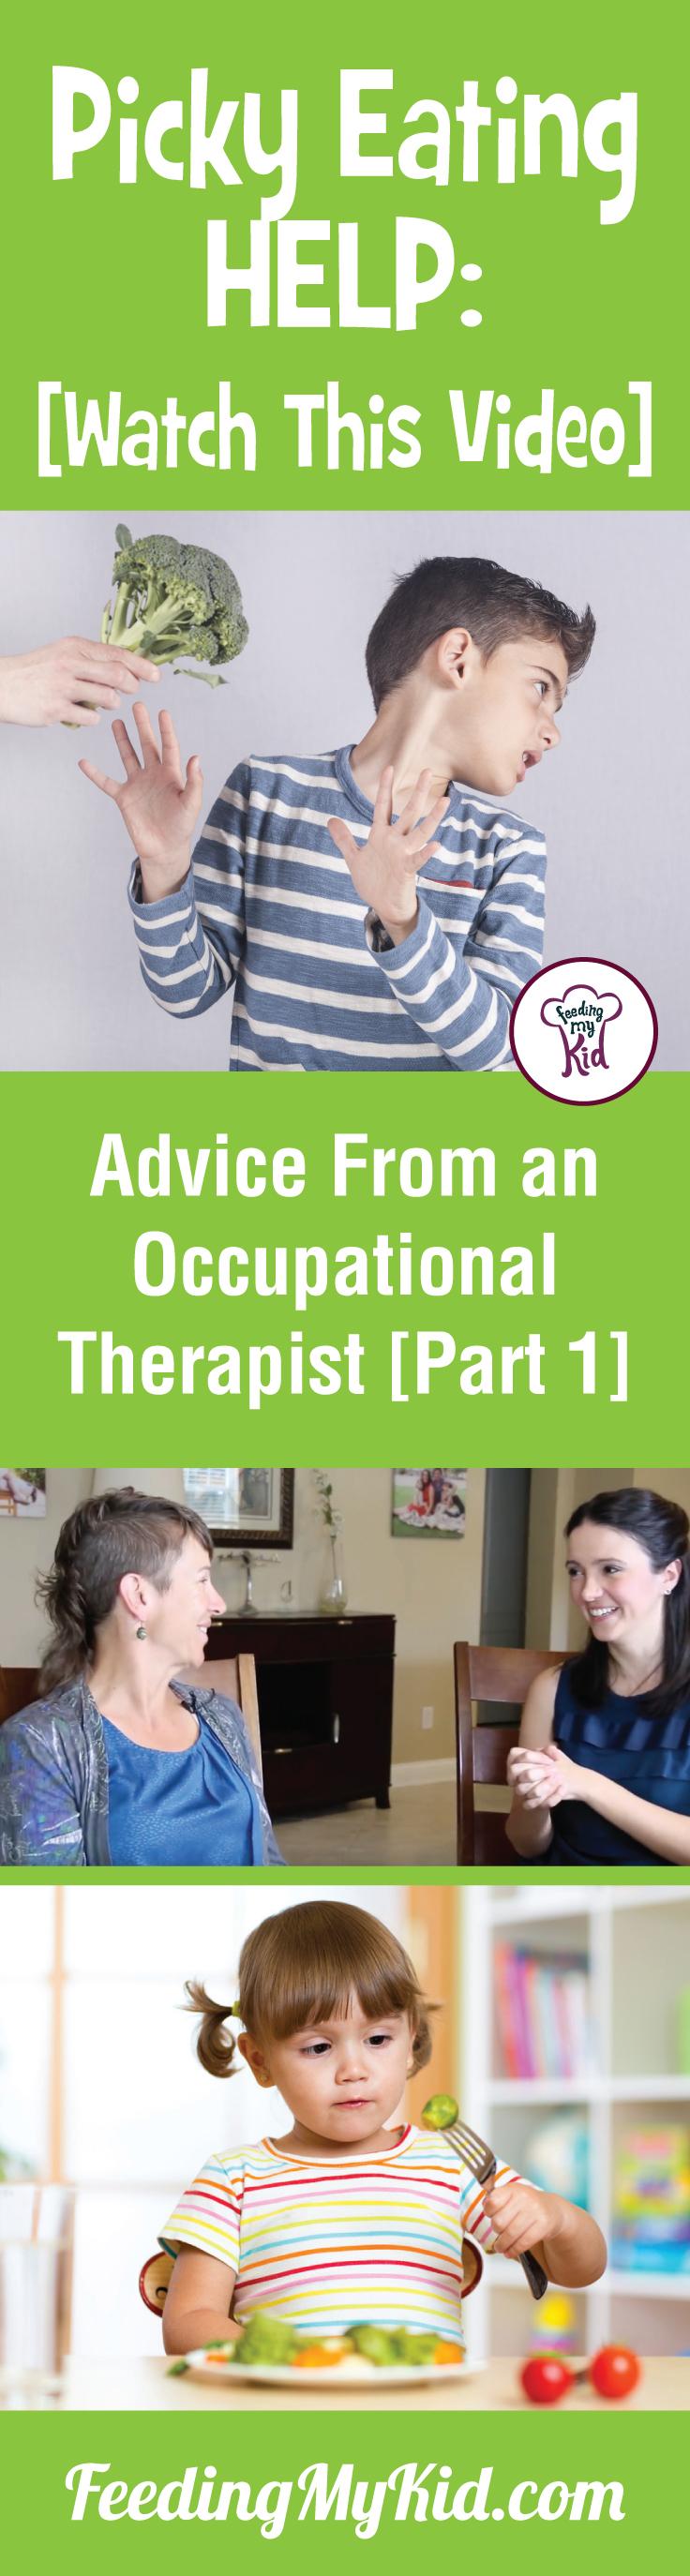 Picky Eating Help: Advice from an Occupational Therapist [Part 1]